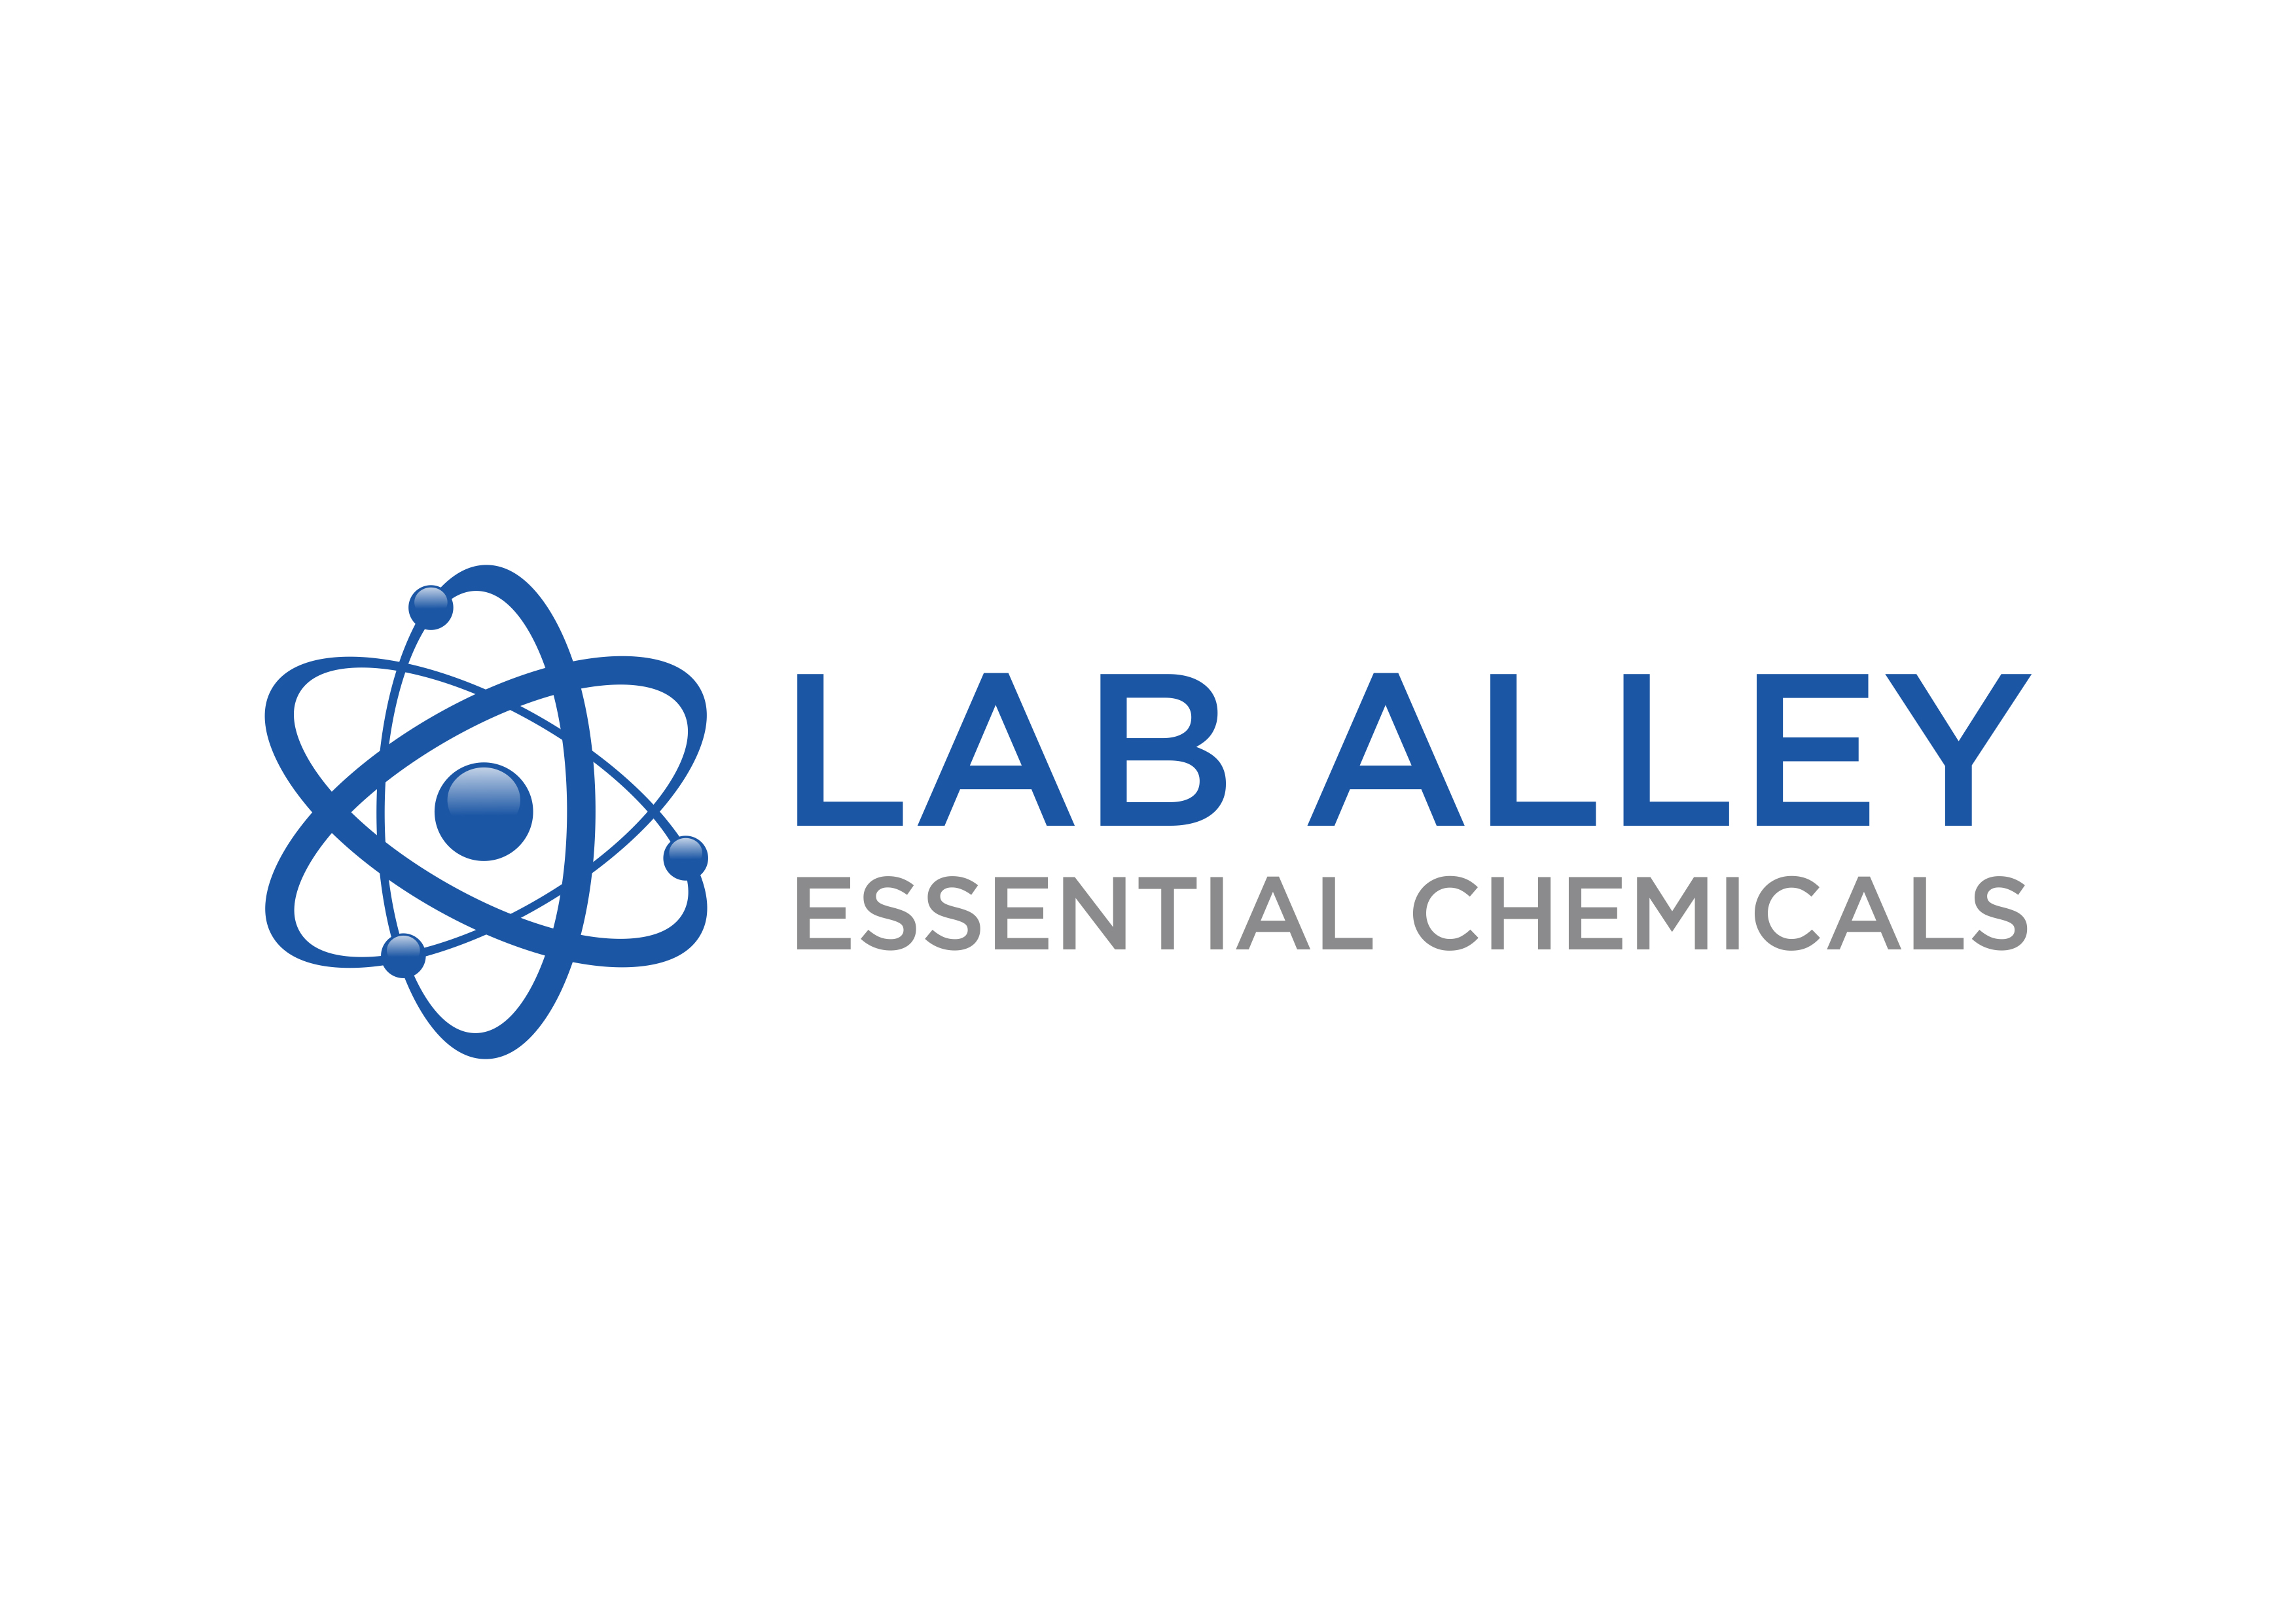 Lab Alley